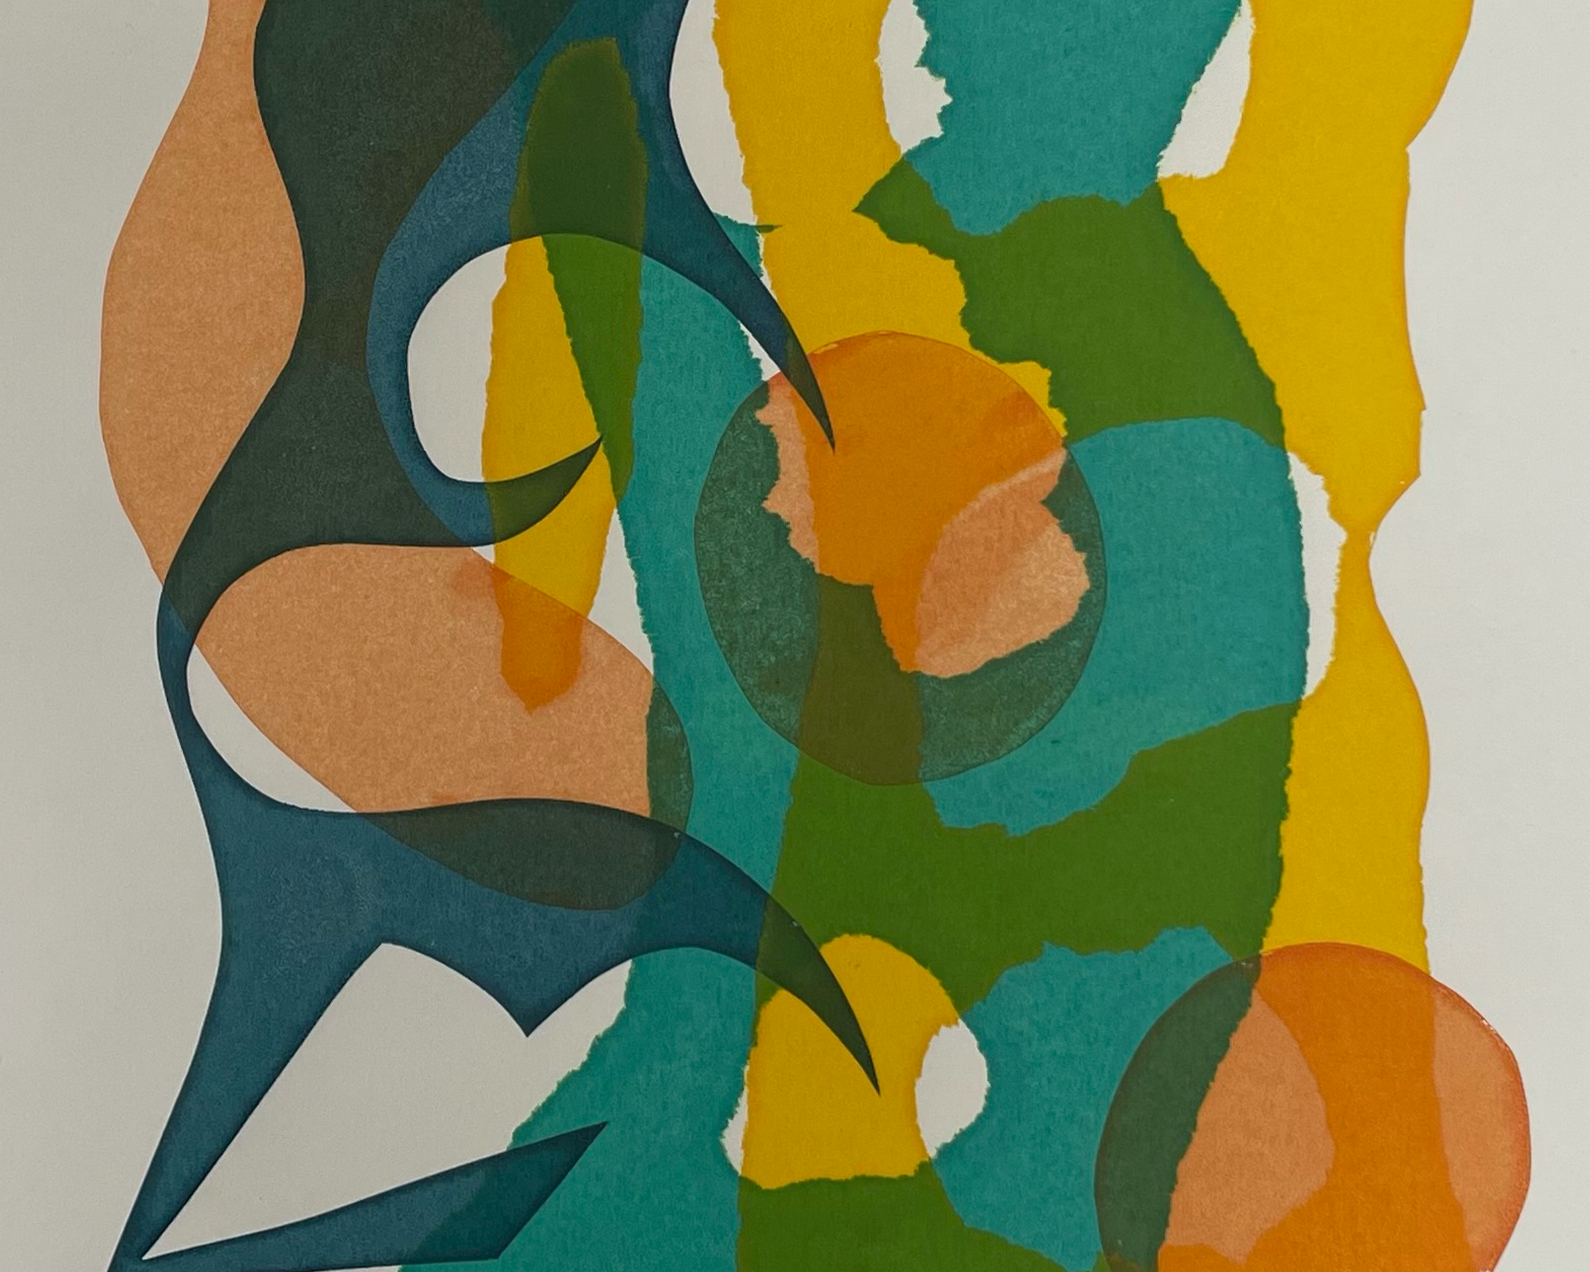 An image of a silk screen print using paper stencils. The main colours used are blue, teal, yellow and orange.